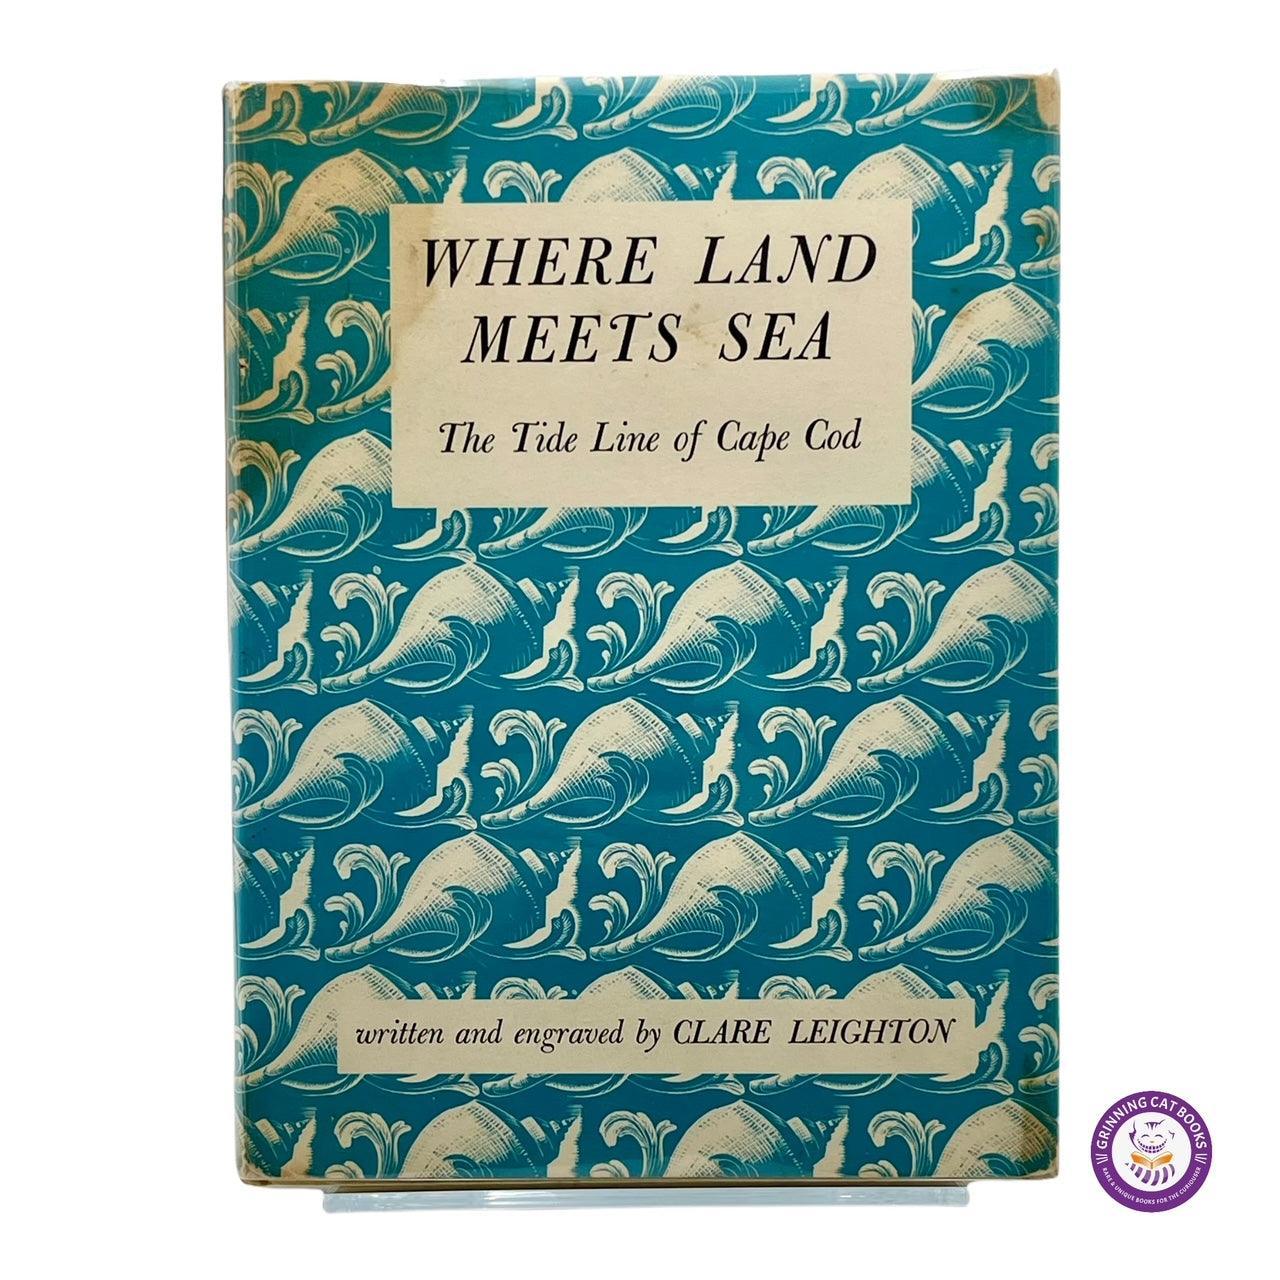 Where Land Meets Sea: The Tide Line of Cape Cod (signed by the author and renowned artist, Clare Leighton) - Grinning Cat Books - NATURAL HISTORY - AMERICANA